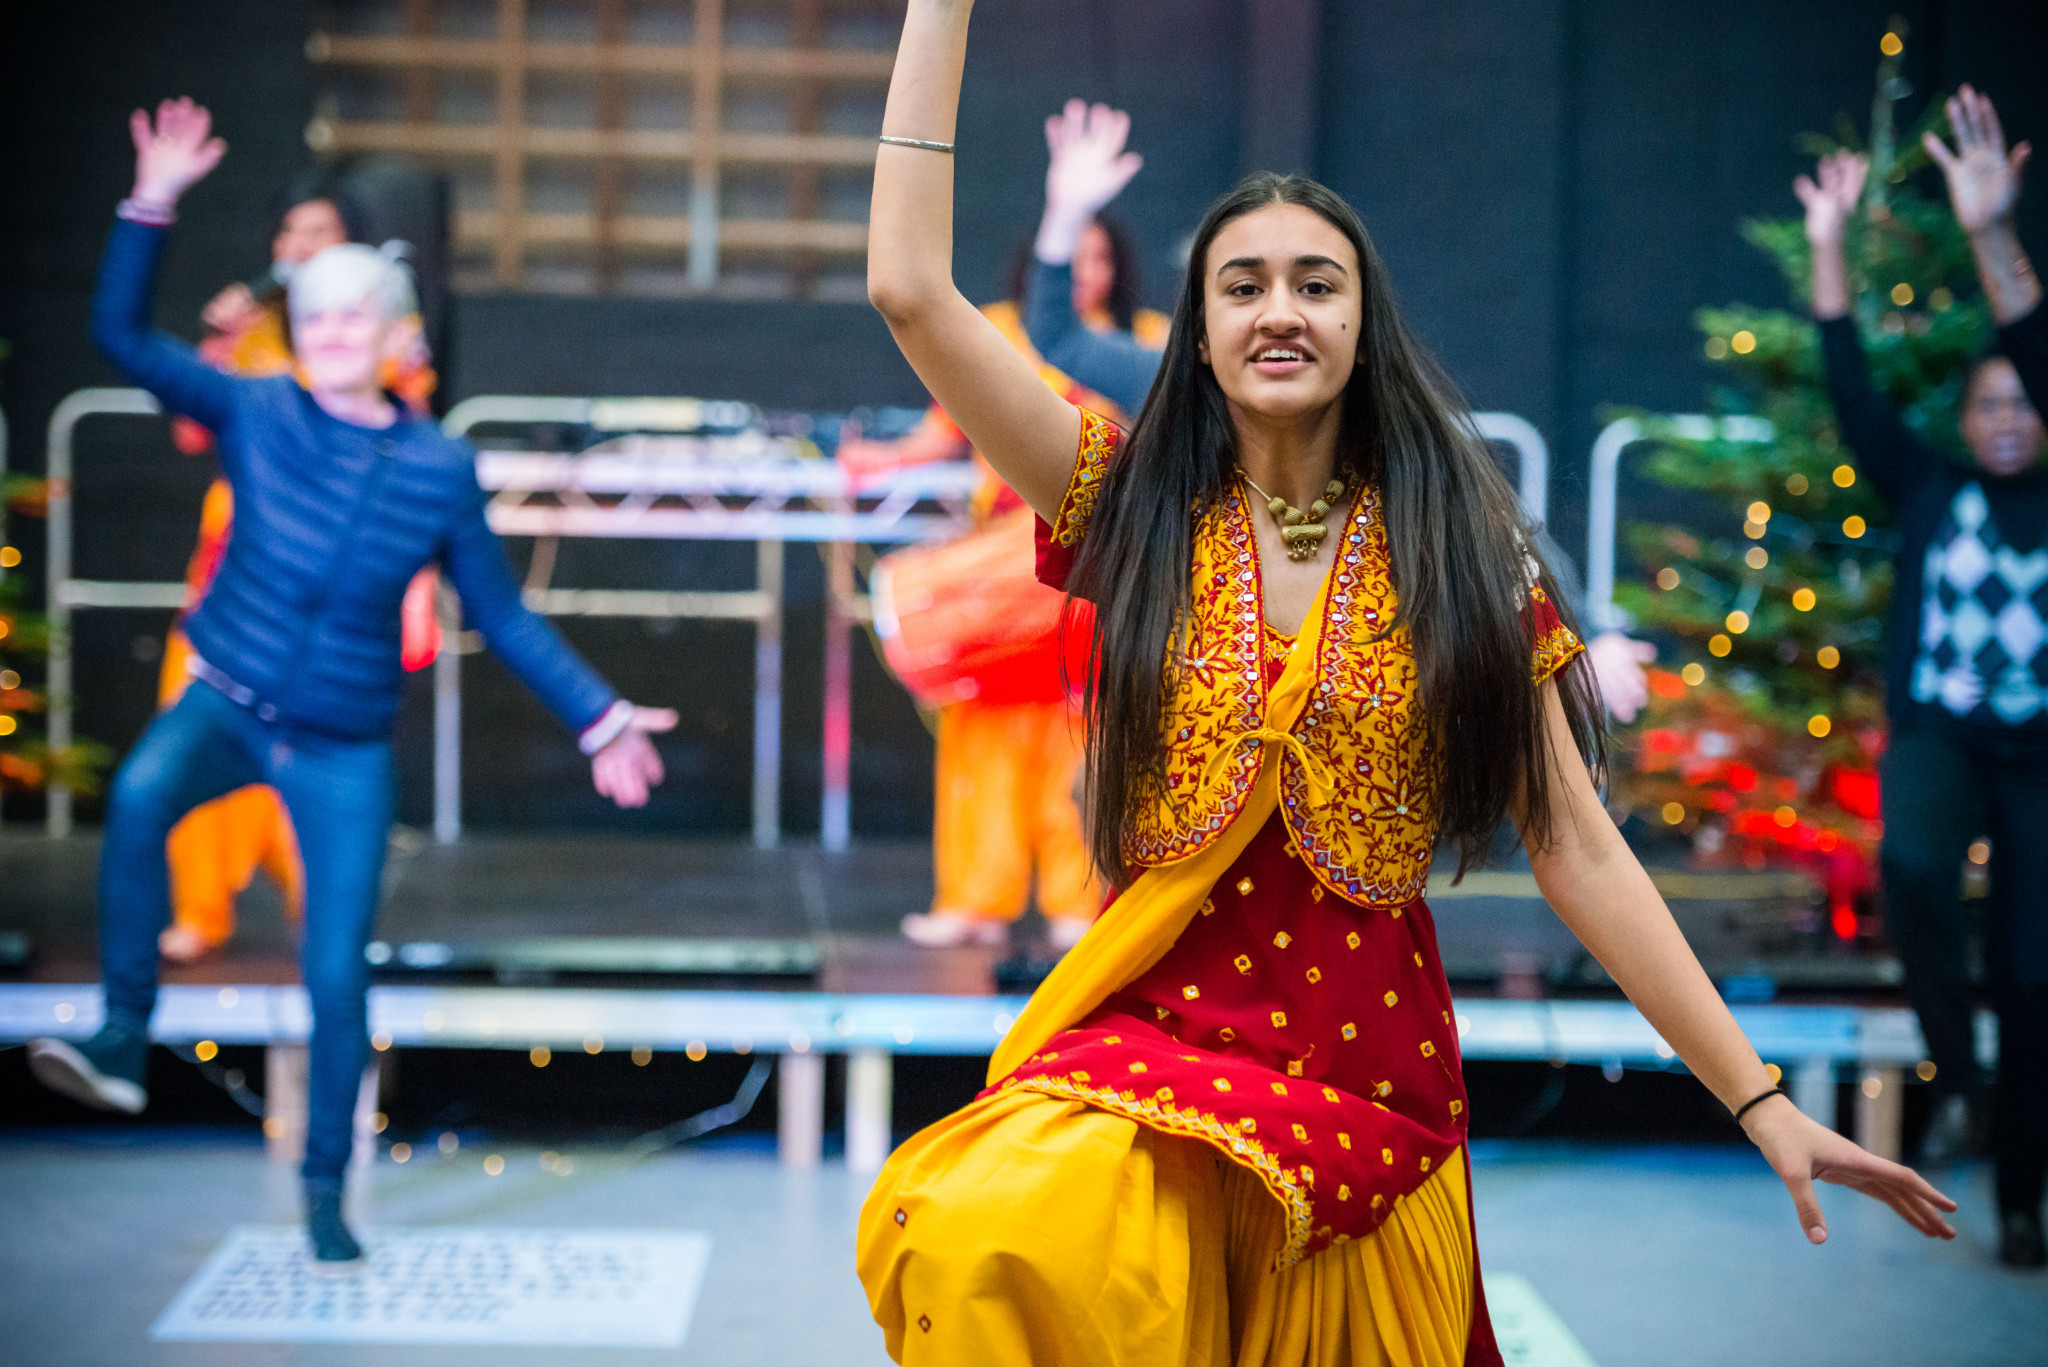 West Midlands arts projects have been awarded funding through a collaboration between Birmingham 2022 and Spirit of 2012 ©Birmingham 2022